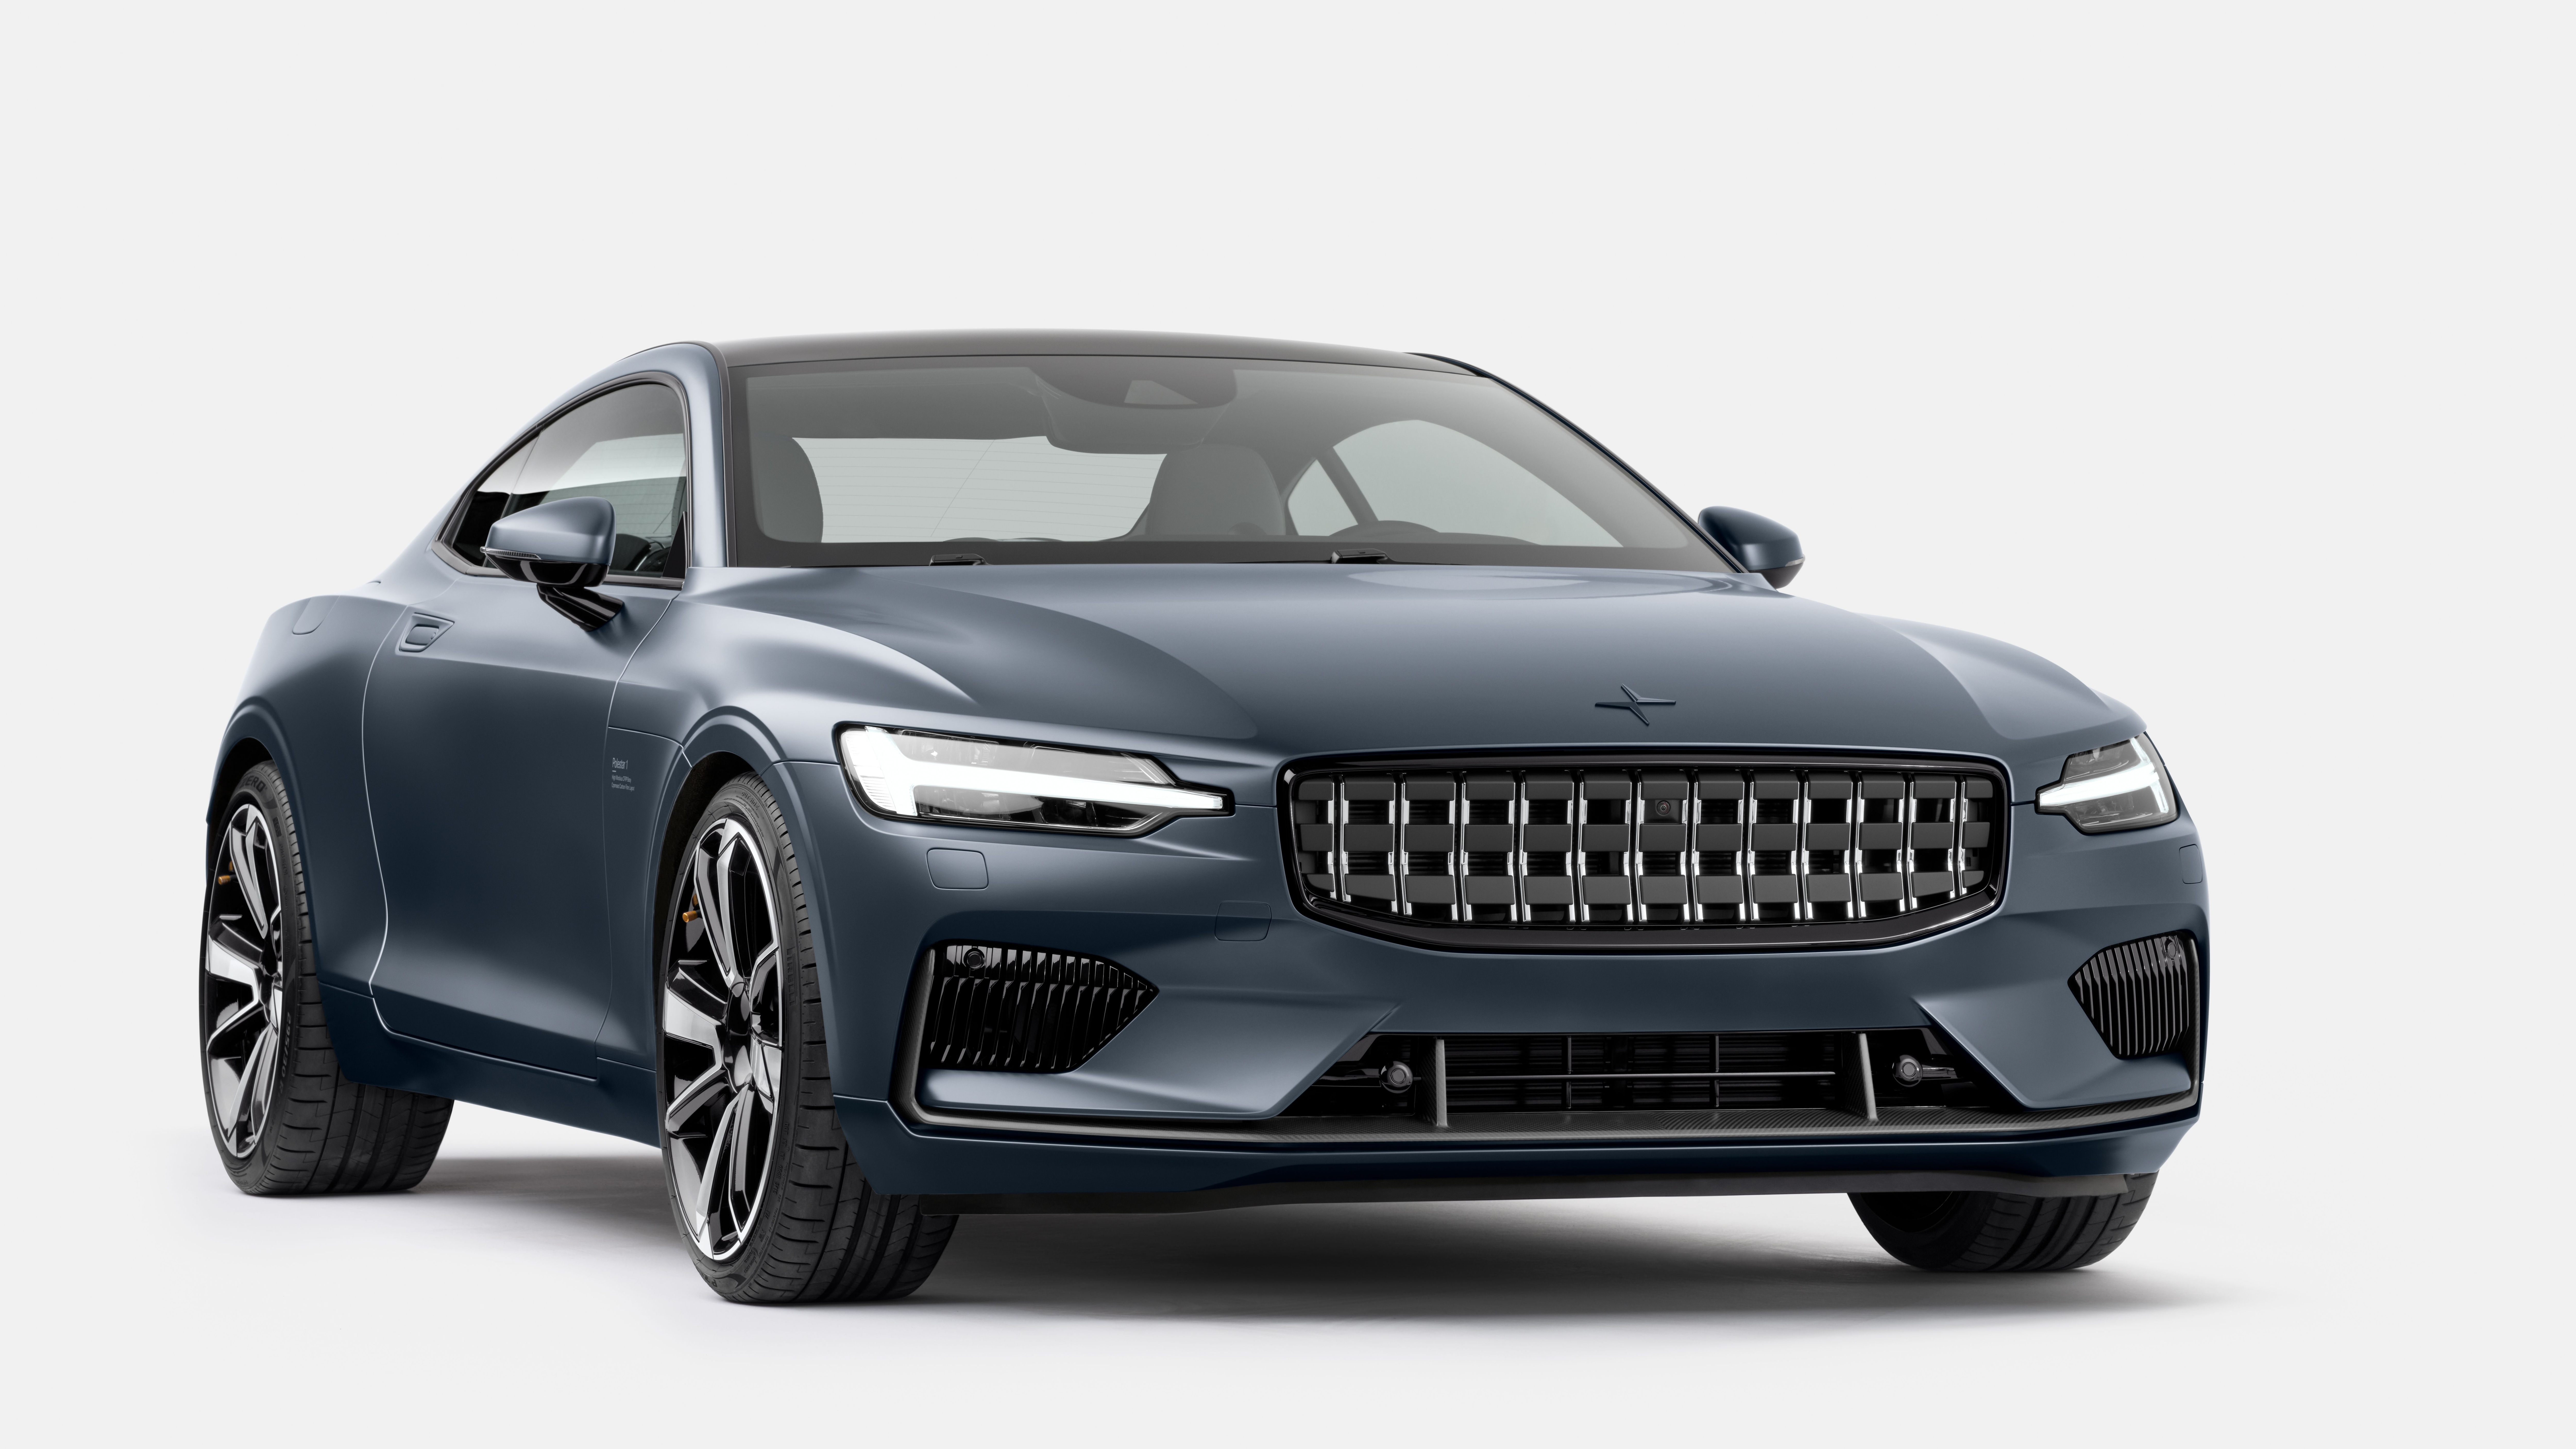 Full front view of a blue Polestar 1 